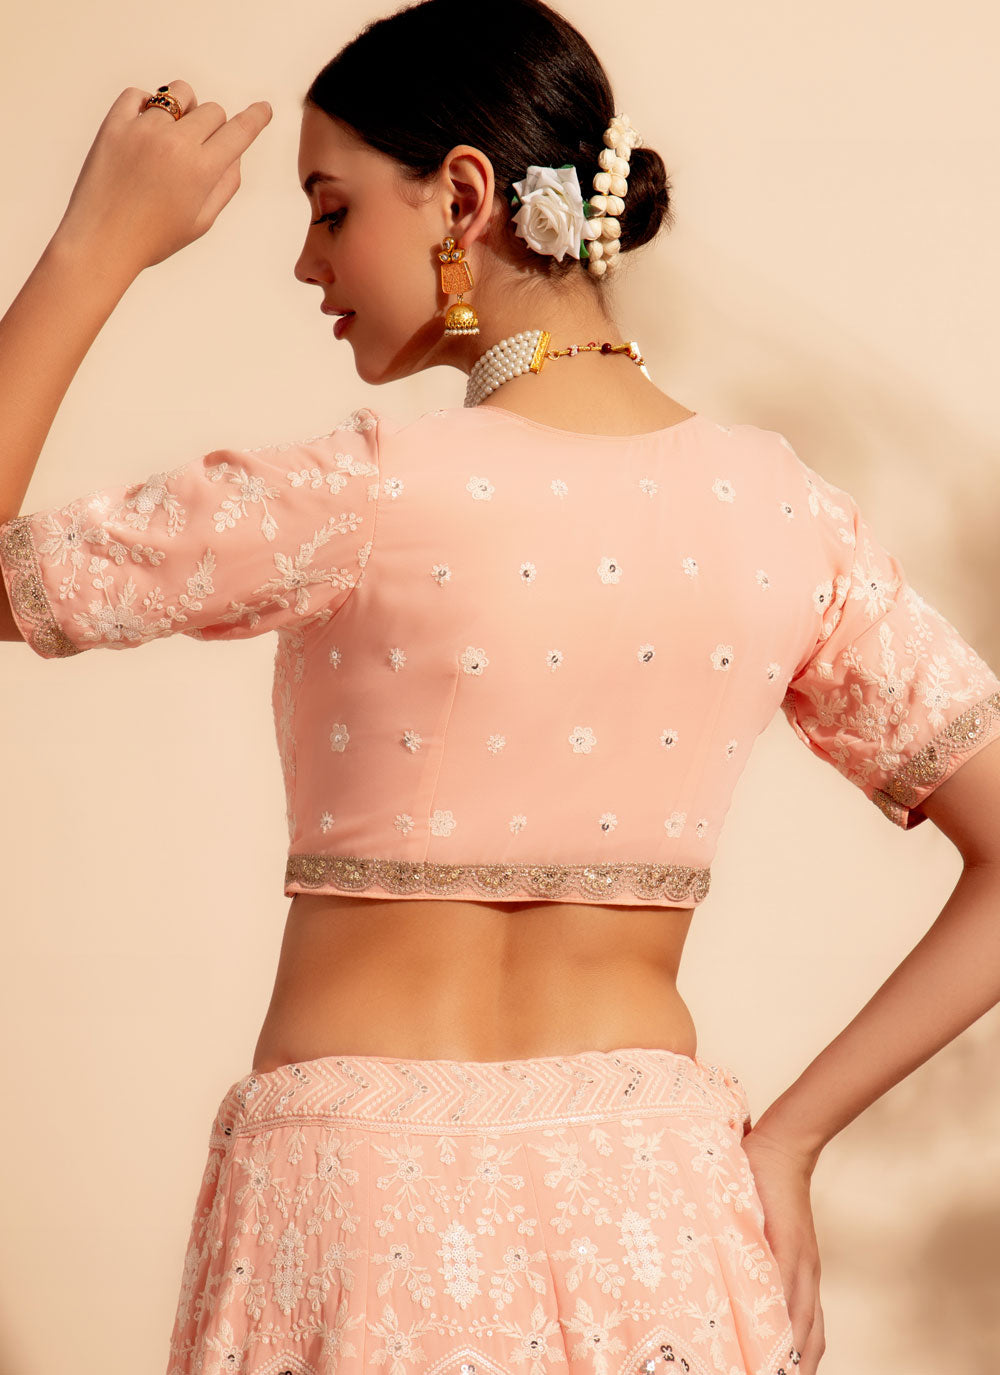 Embroidered And Sequins Work Georgette Lehenga Choli In Peach